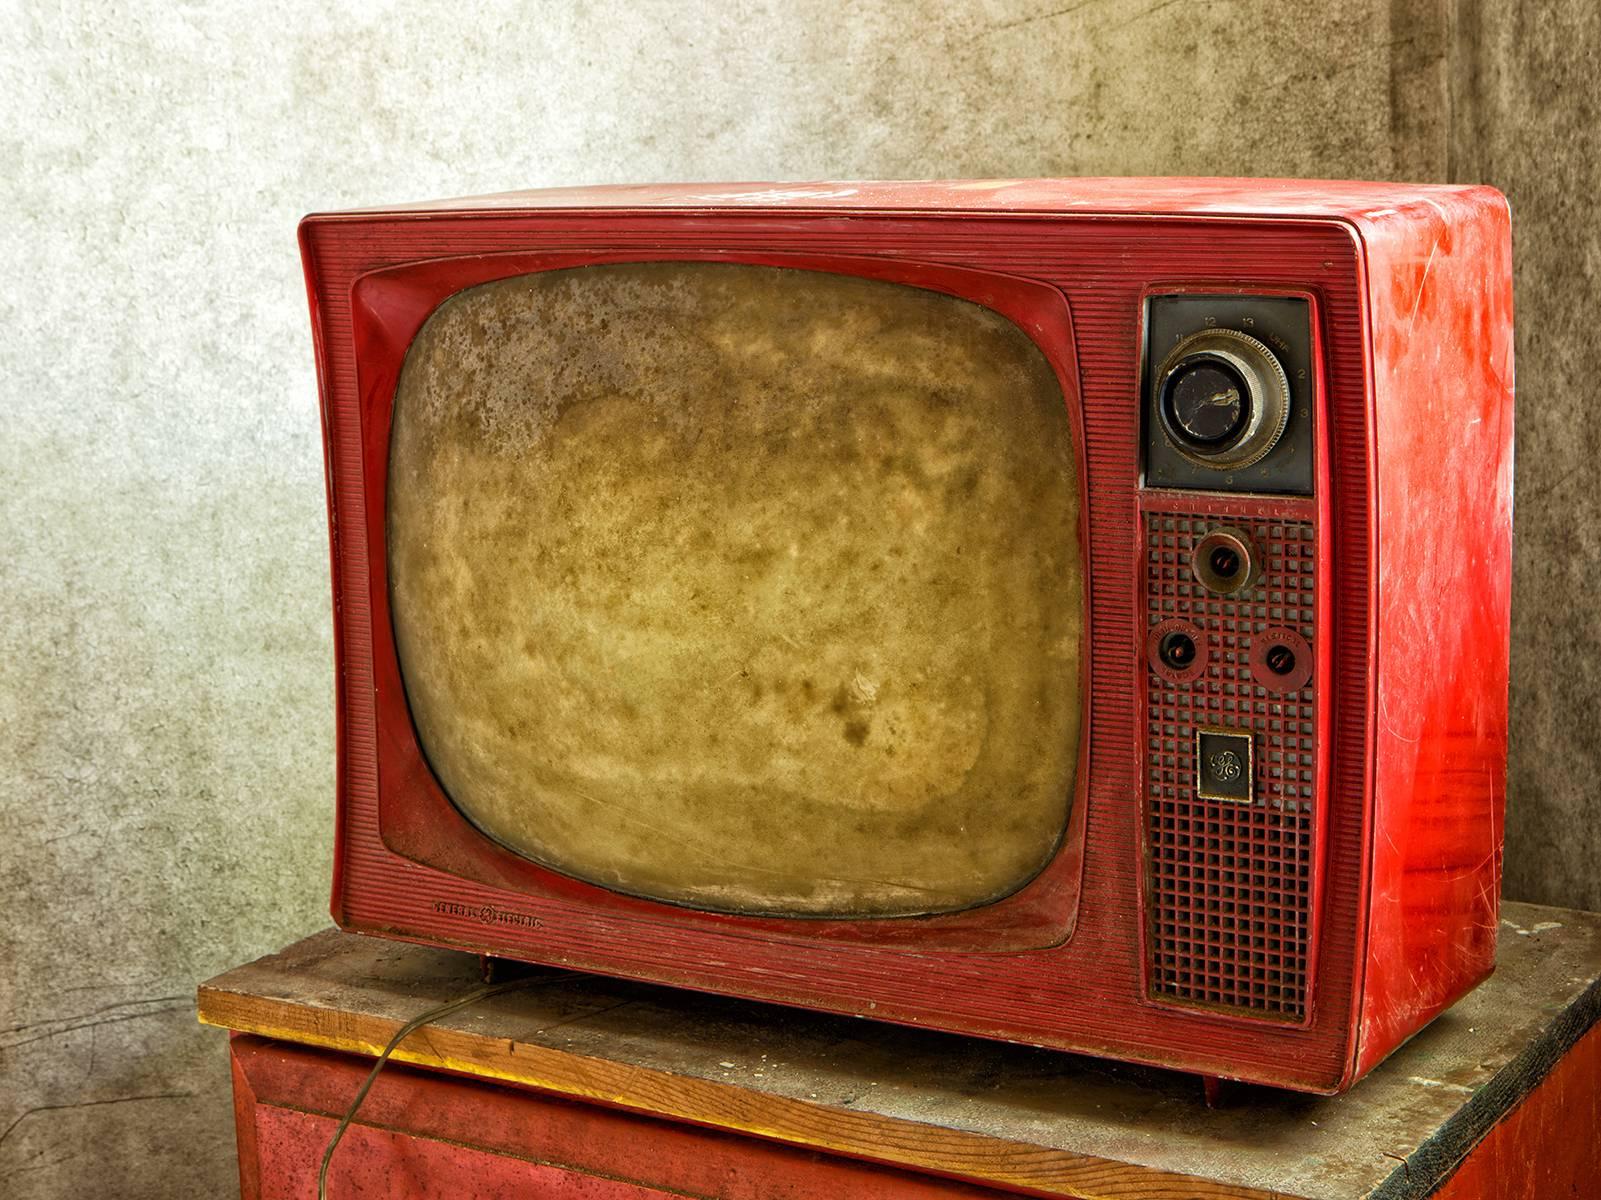 Rebecca Skinner Still-Life Photograph - "Aged #2", contemporary, television, vintage, red, color photograph, metal print